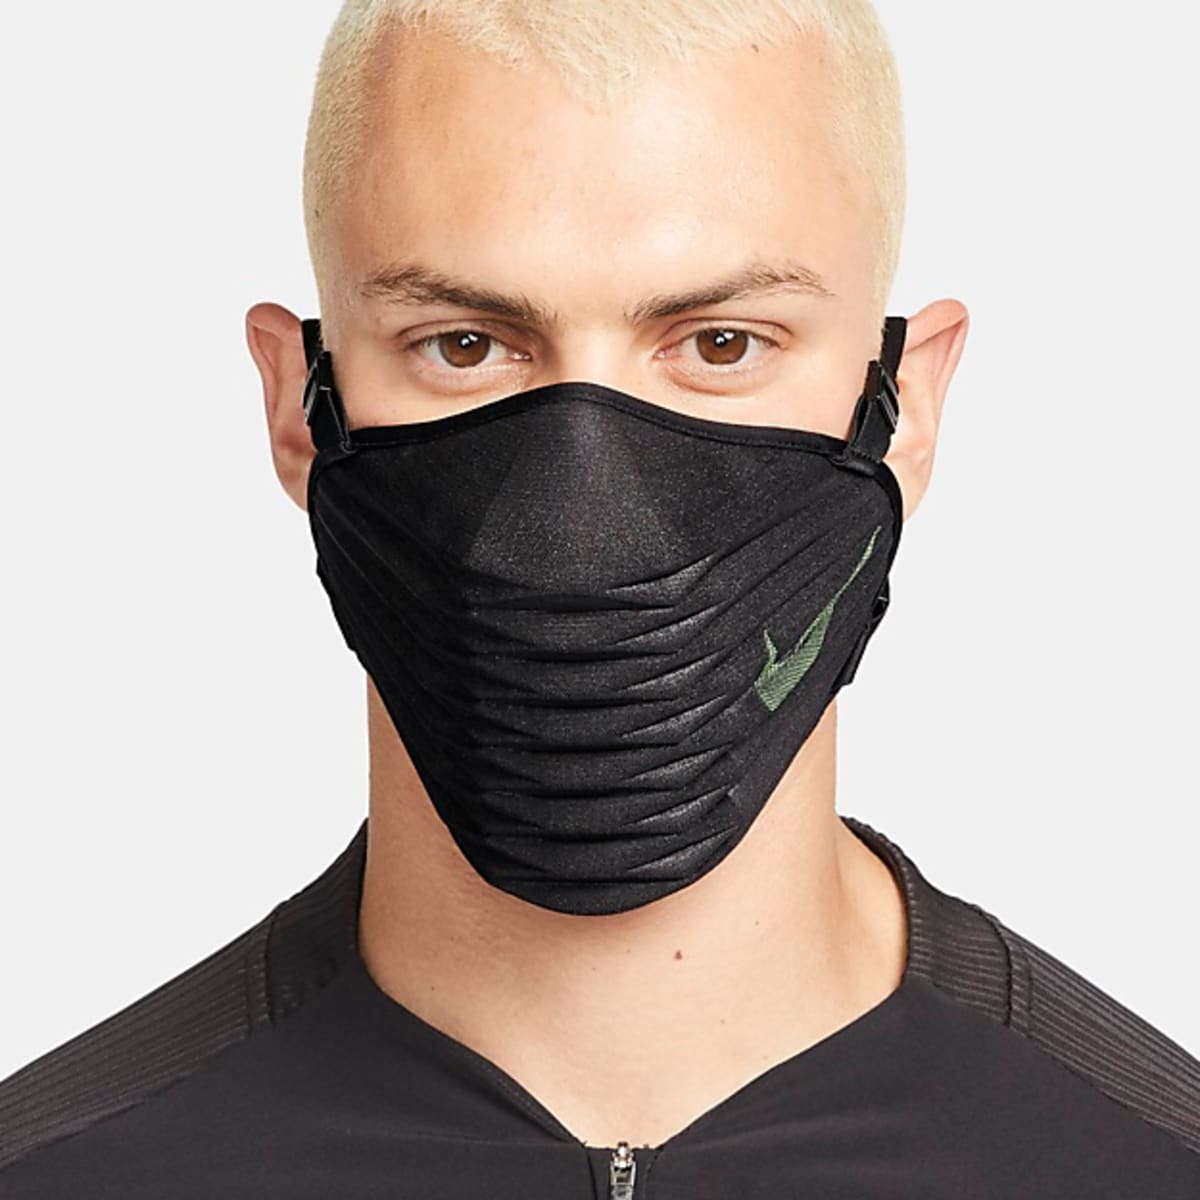 Wrijven Grootste Uitgaand Nike releases its first performance mask, the Venturer - Acquire